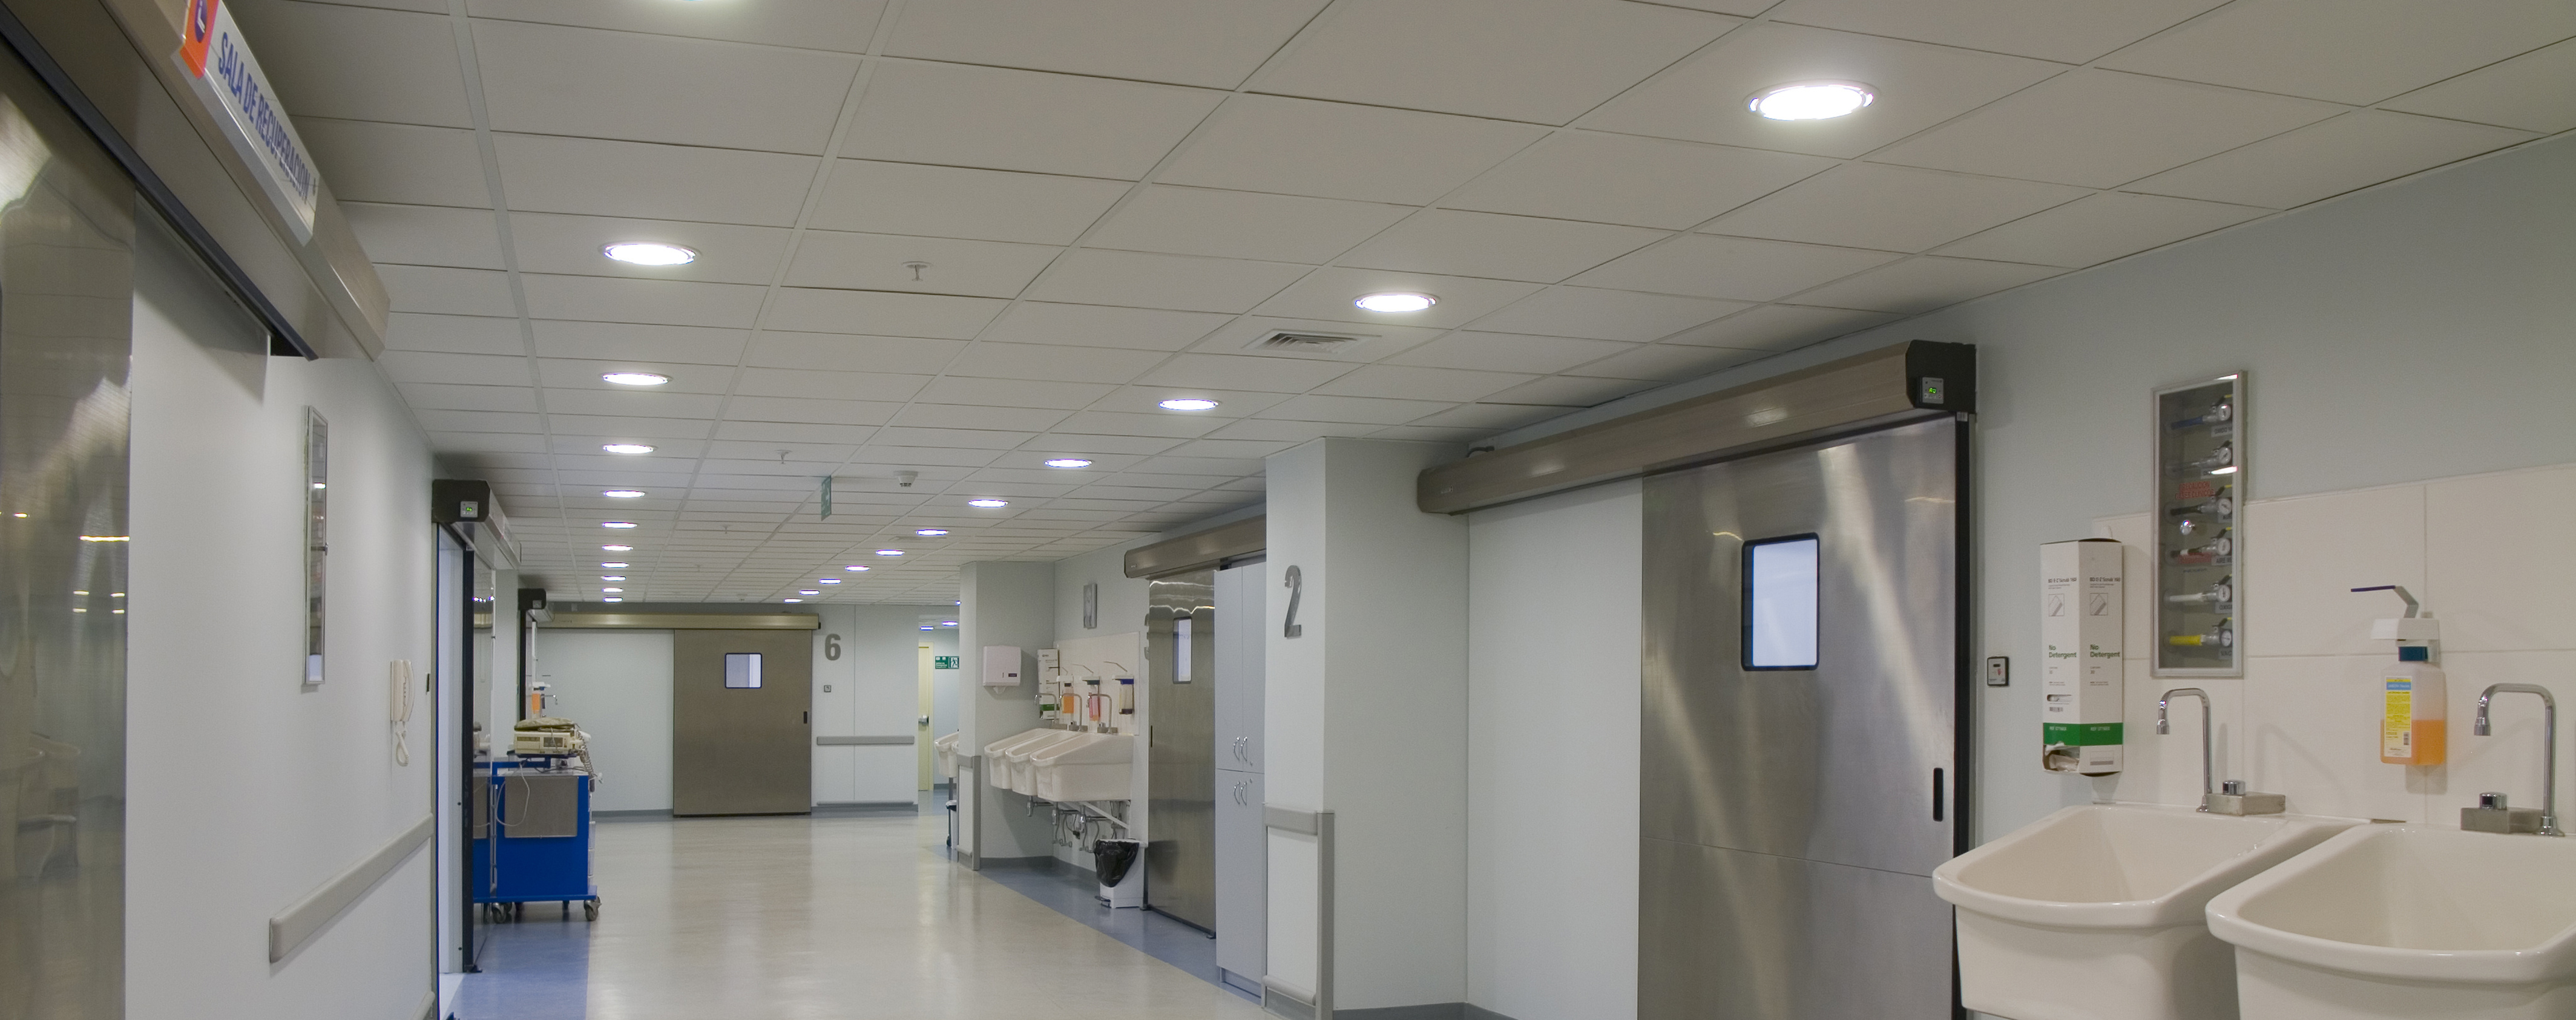 Need a healthcare facilities electrician in Northampton? Then Thorn Electrical are the people to contact